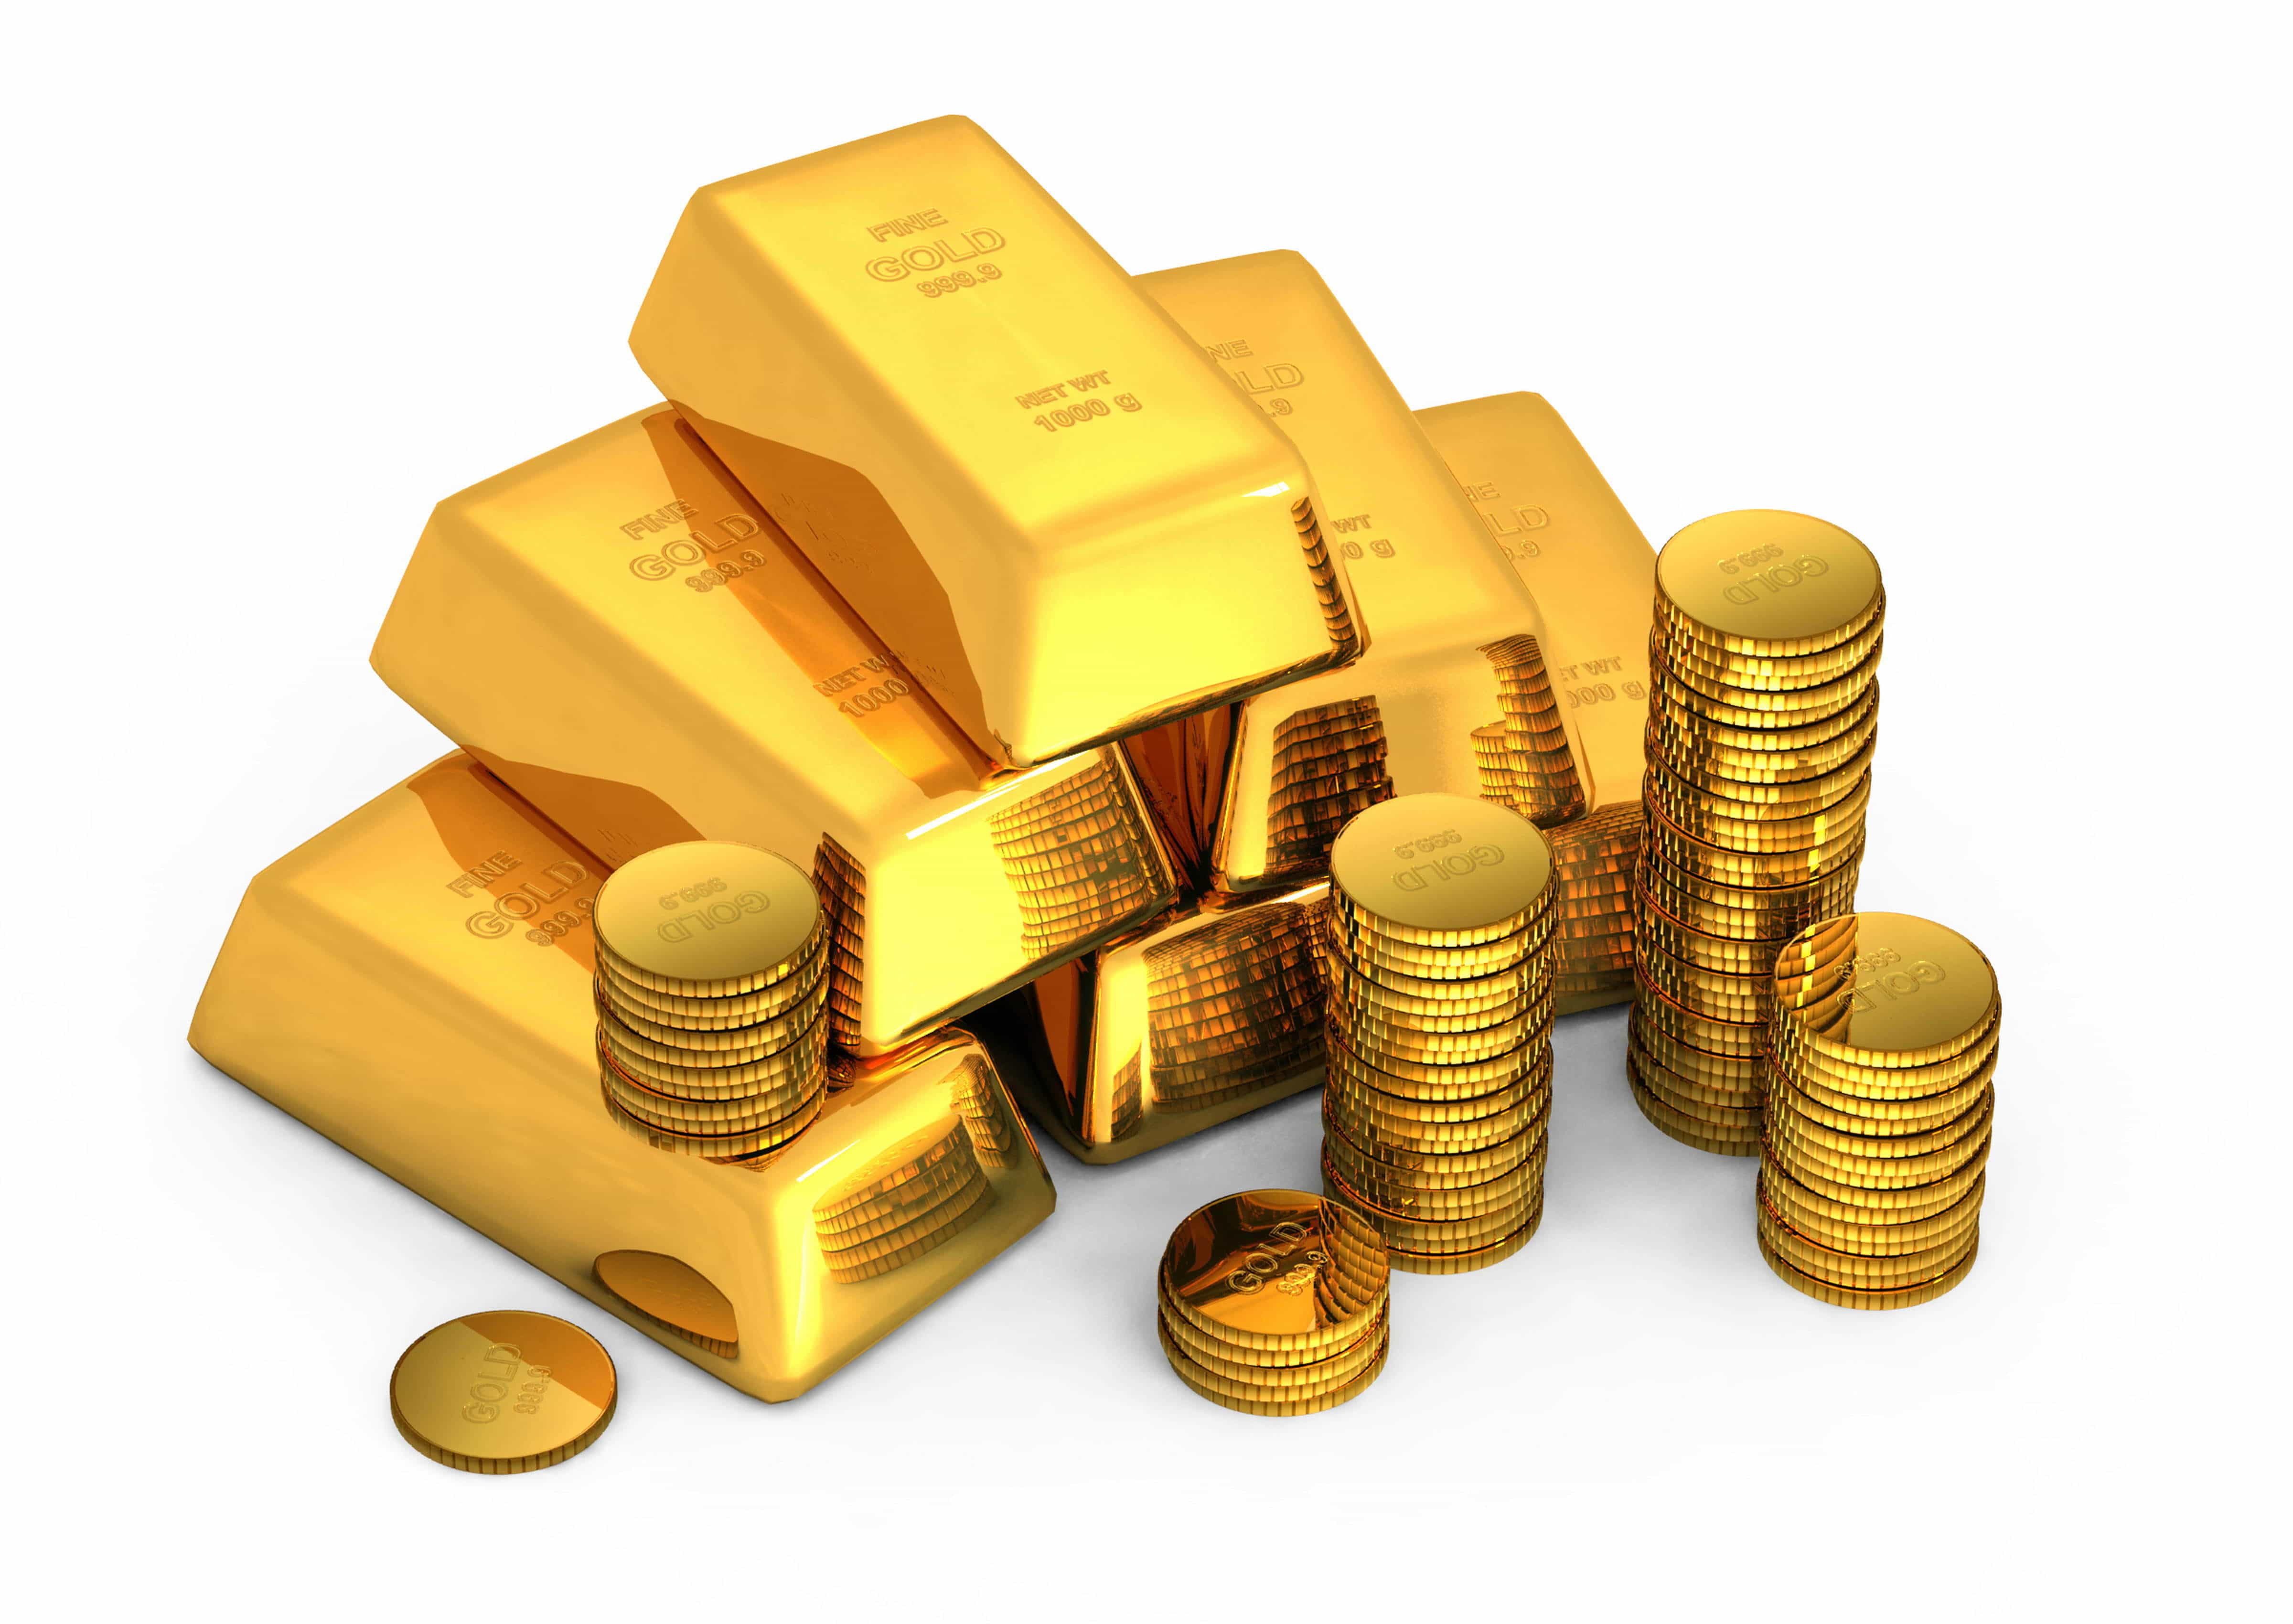 gold investments - buy, hold or sell